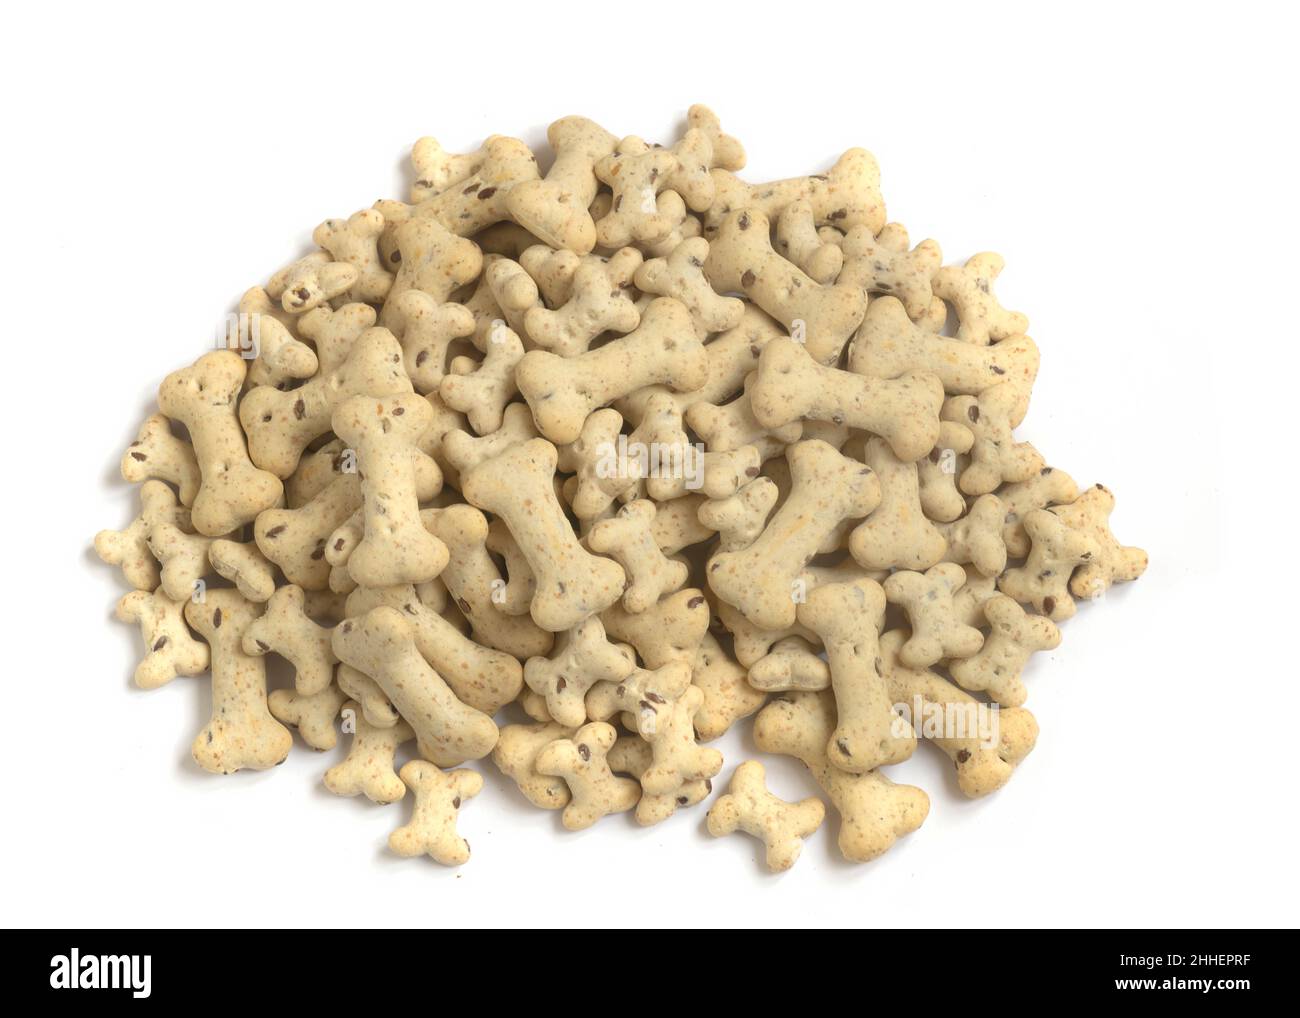 pile of heathy bone shaped dog and puppy biscuits treats  used for training and occasions on a white isolated background  macro shot Stock Photo